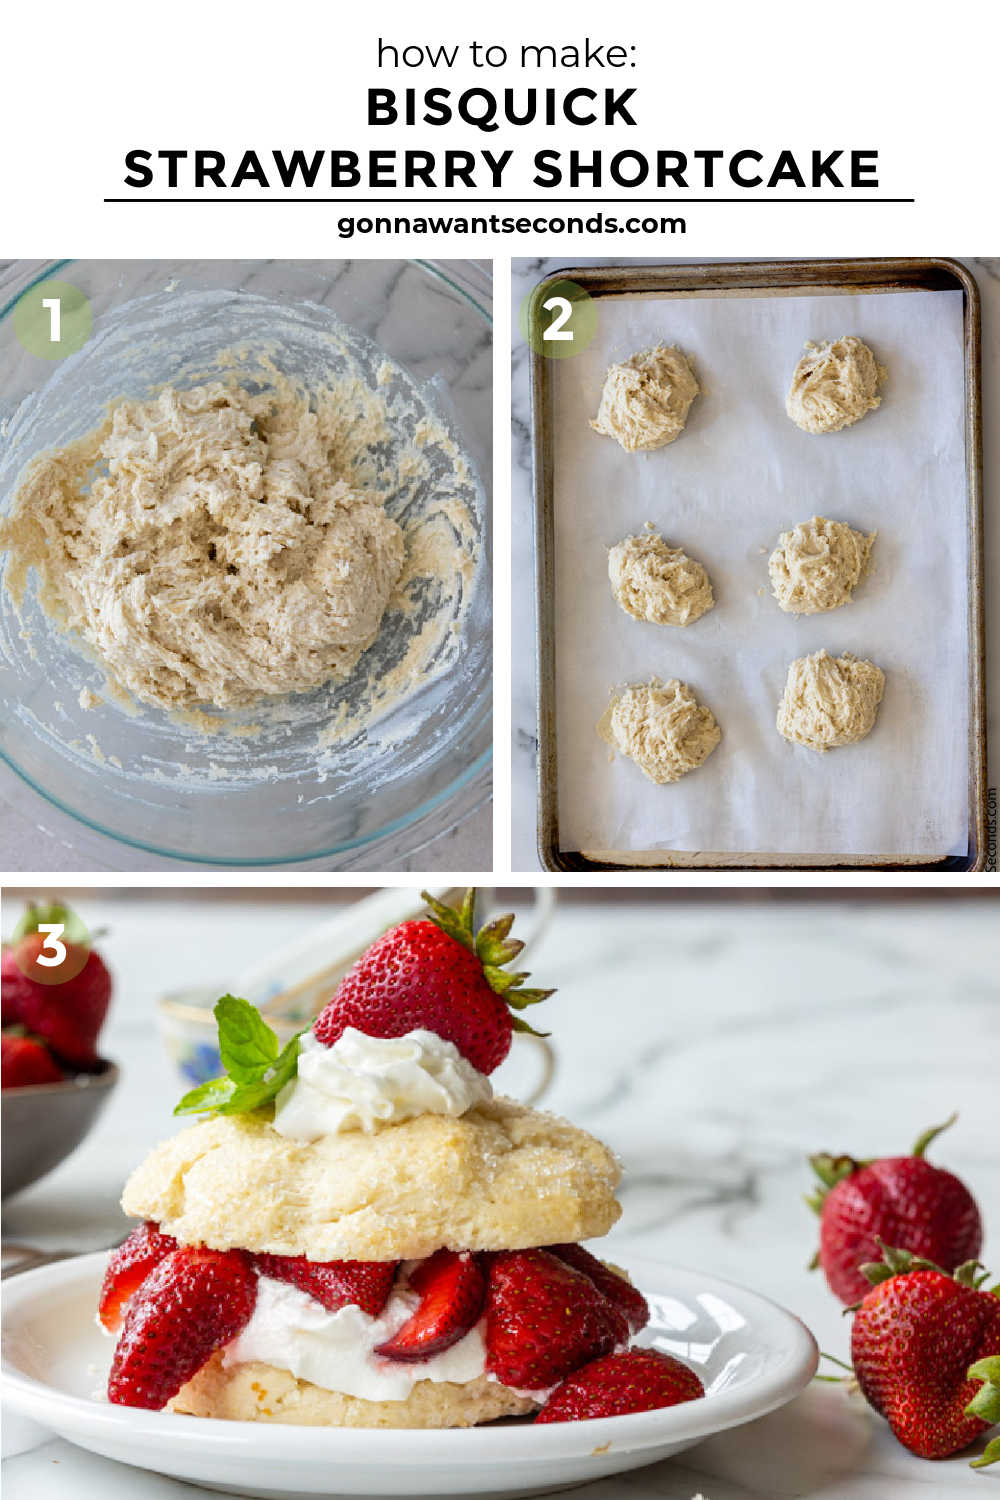 Step by step how to make Bisquick Strawberry Shortcake